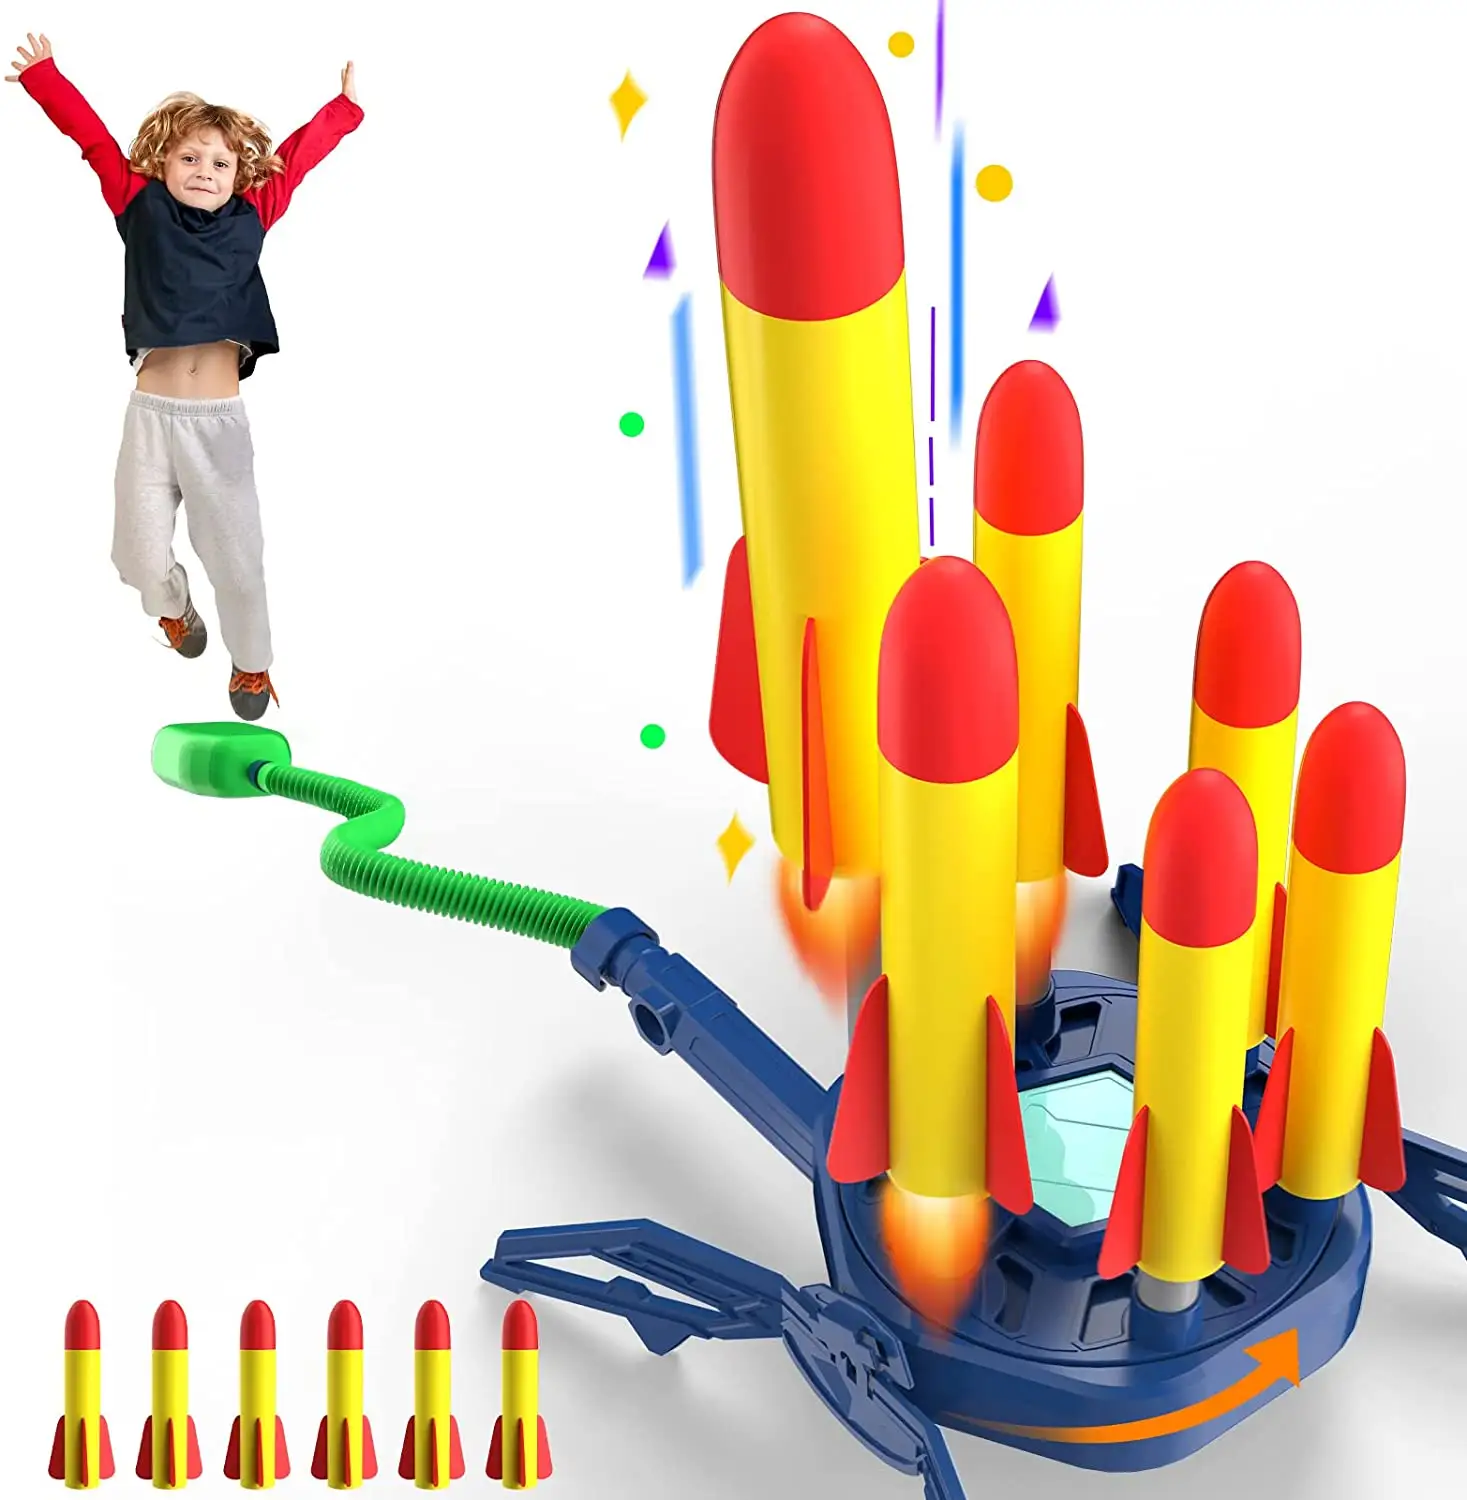 2022 Outdoor Rocket Launcher with Adjustable Sturdy Launcher Stand with Stomp Launch Pad with 6 Foam Rockets for Kids